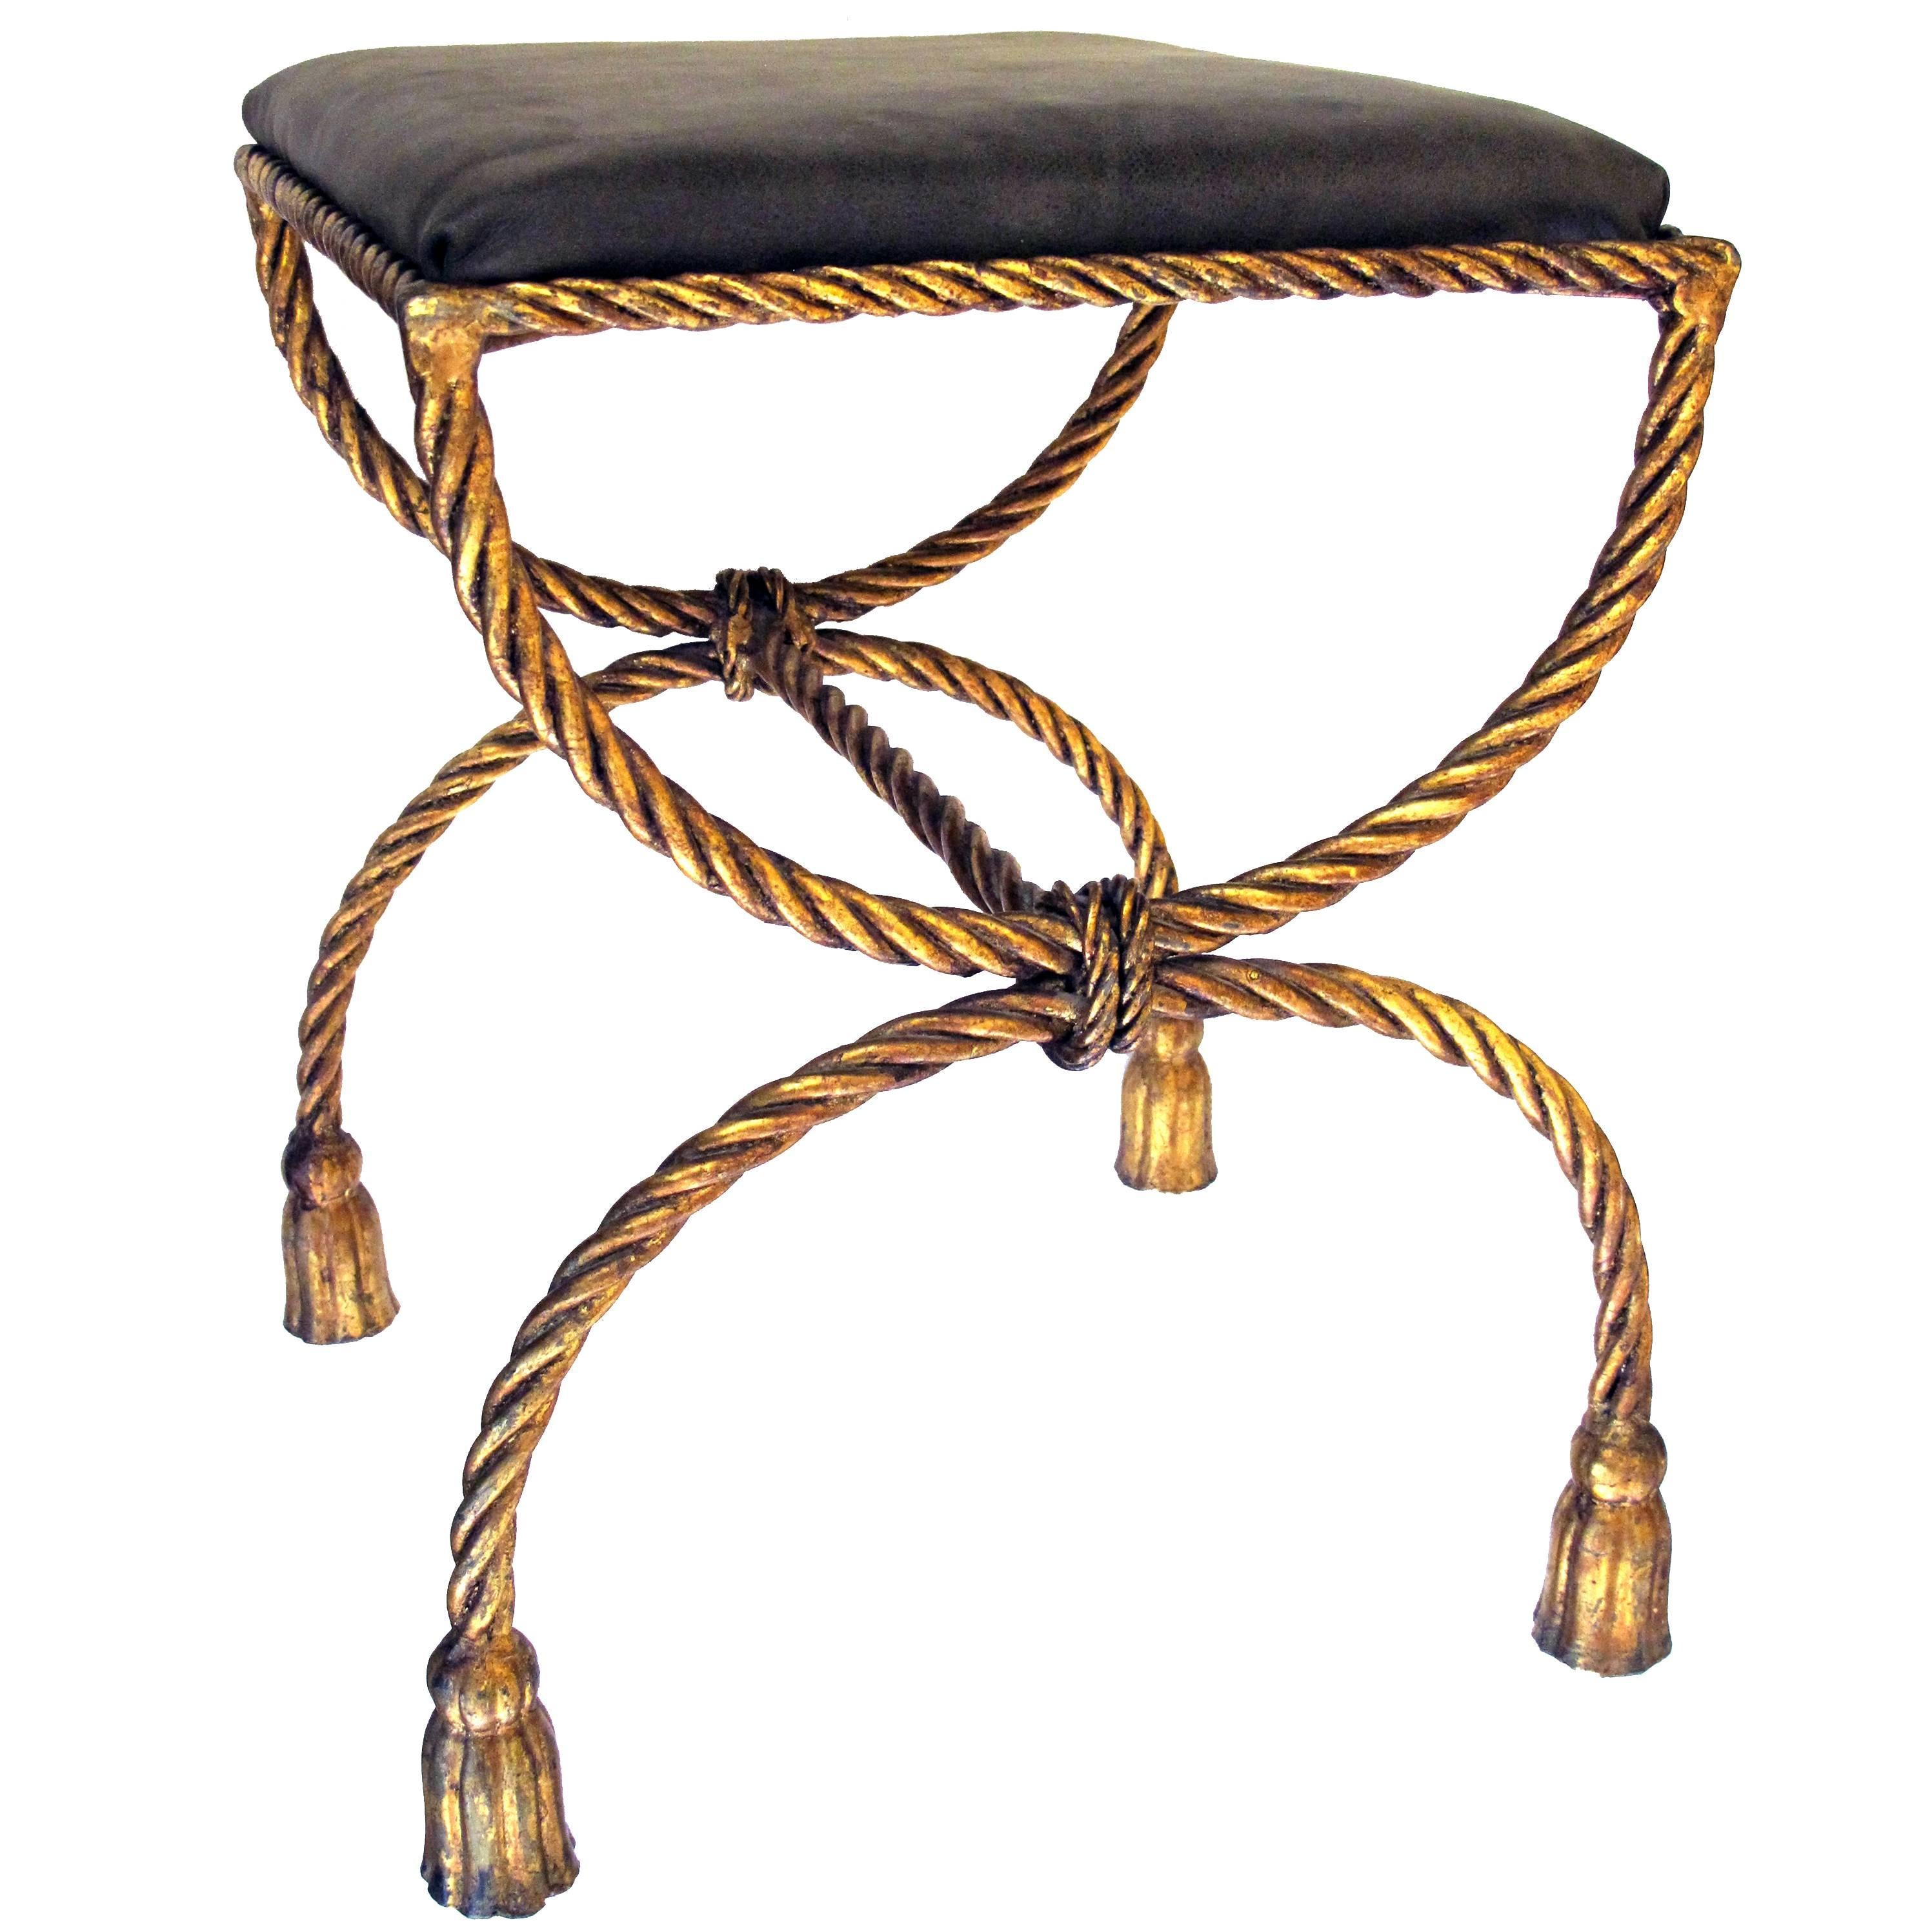 Shapely Italian 196's Gilt Iron Rope-Twist Curule-Form Bench